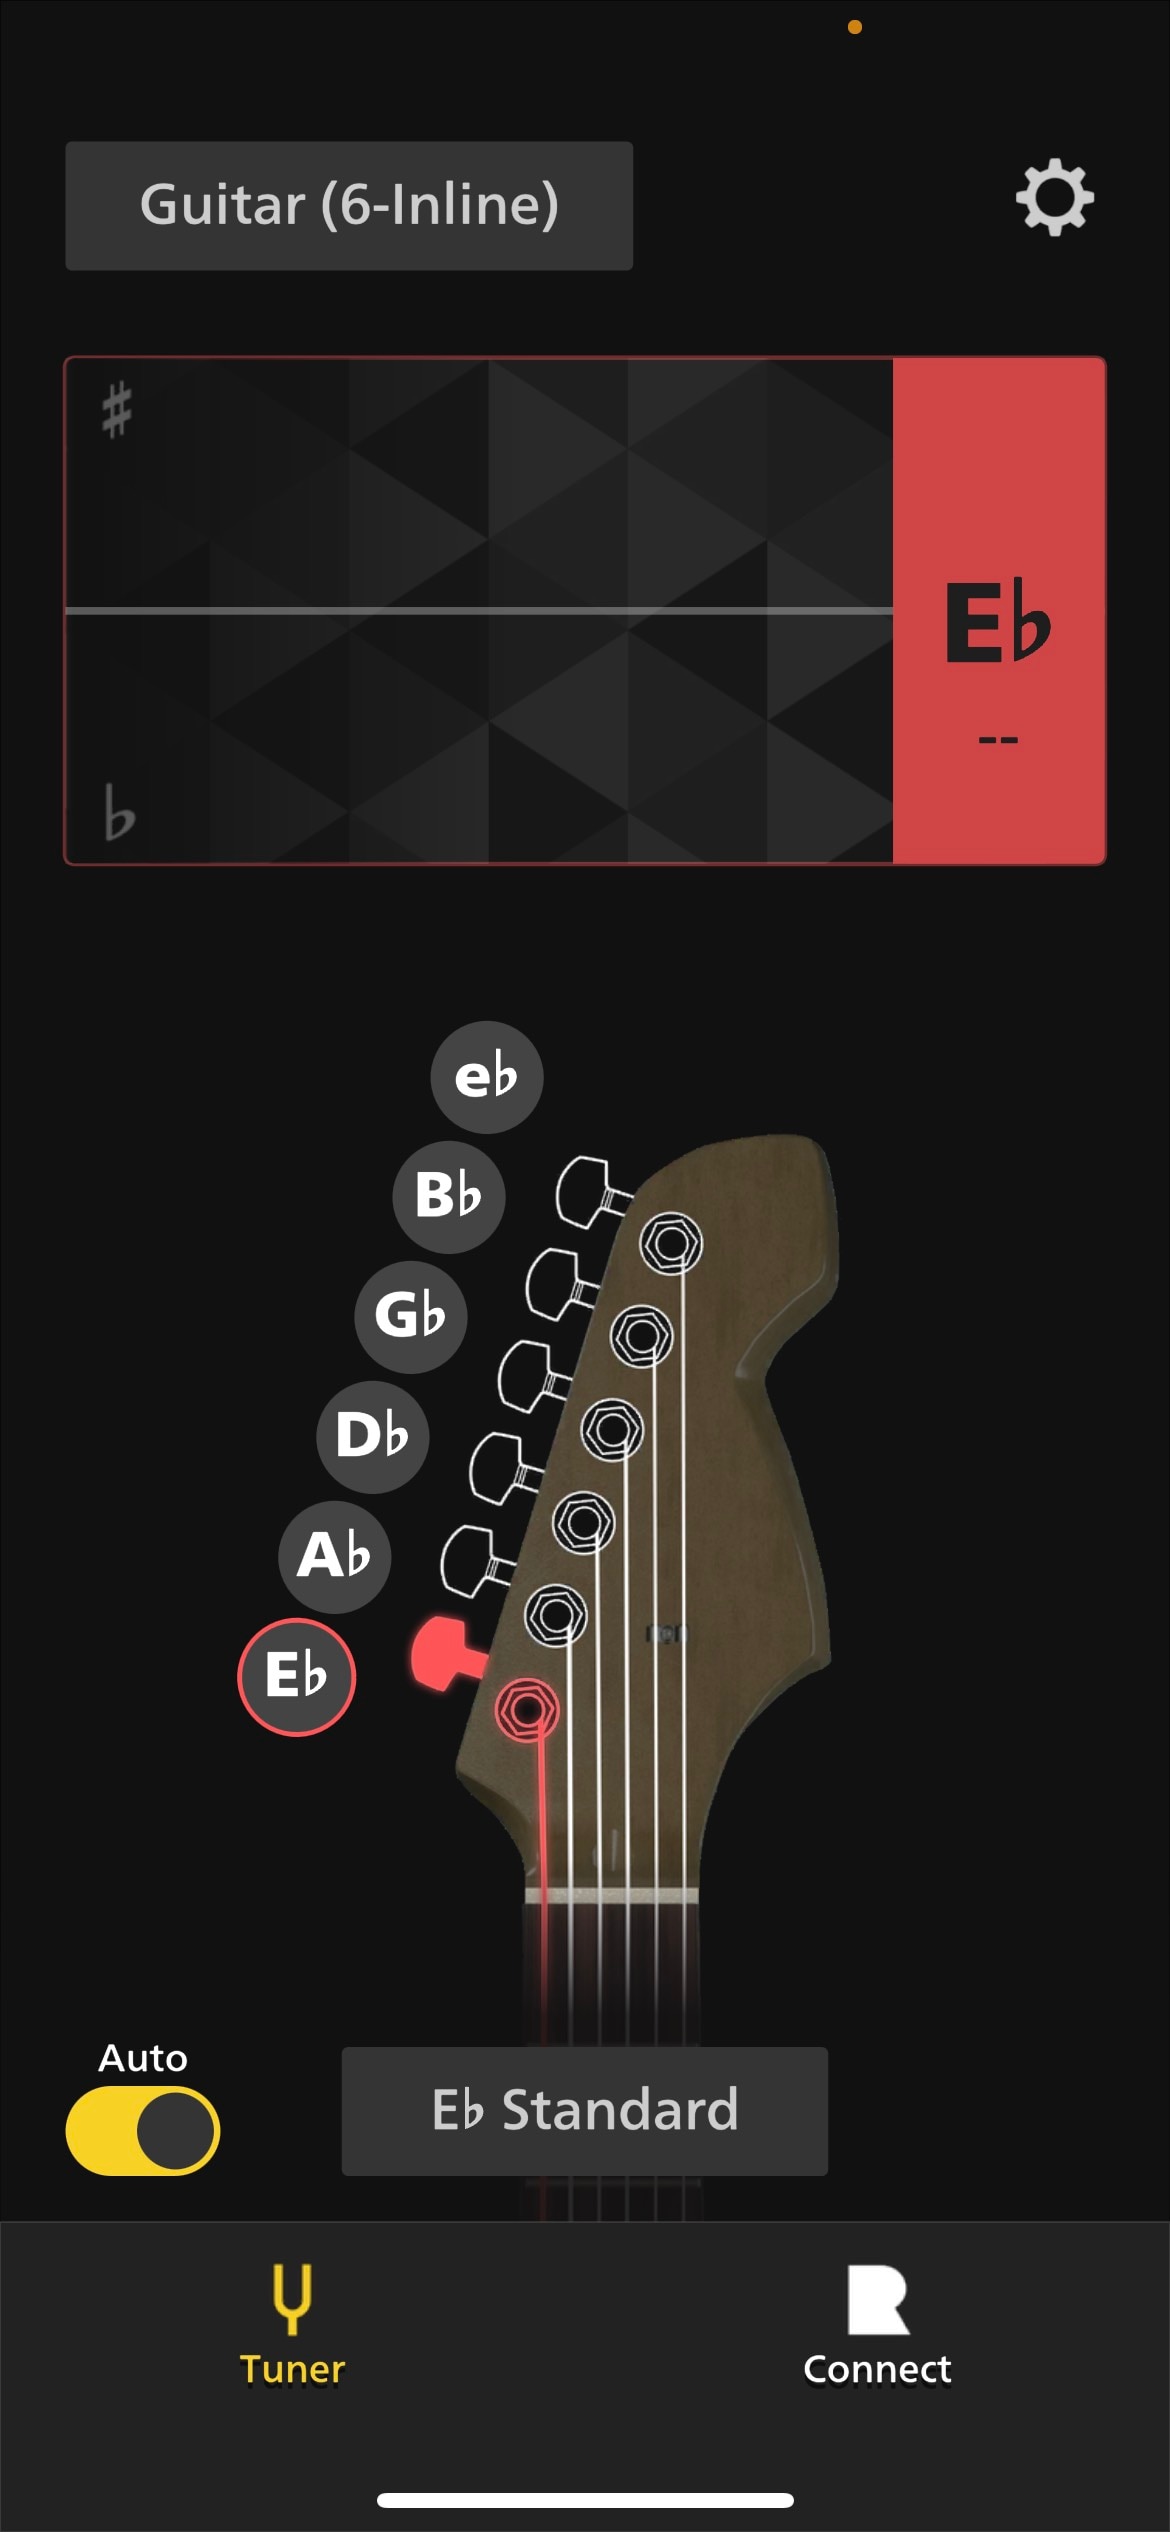 [RS+] News - How To Tune Your Guitar a Half-Step Down - img 2